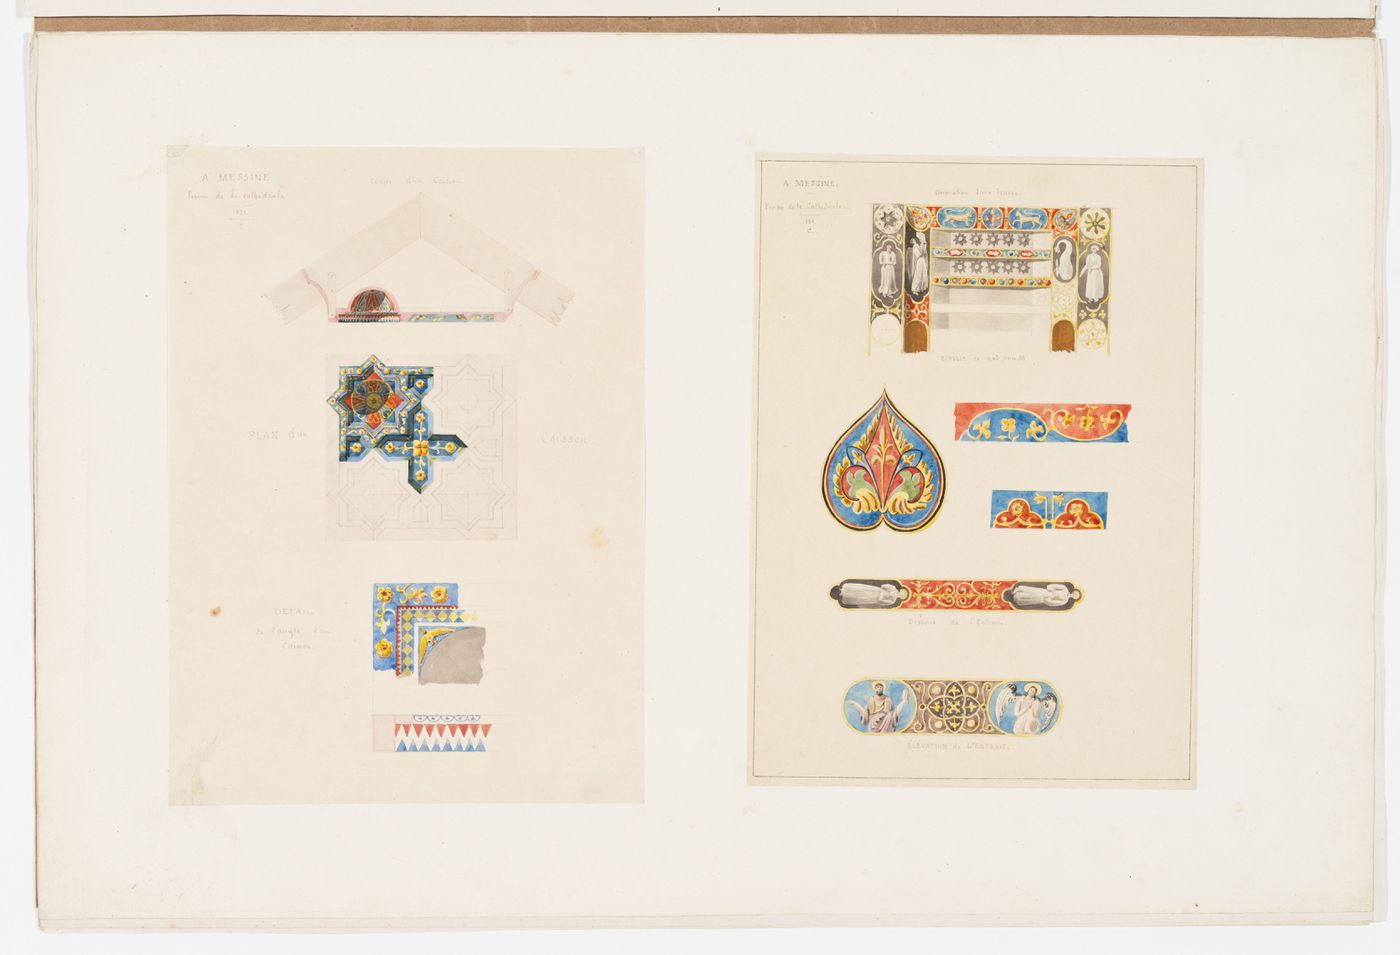 Section, reflected ceiling plan and details of the ornamentation of the coffers of the roof trusses of the Cathedral of San Maria, Messina, including the decoration of a ceiling bay, the underside of a beam, and the elevation of a beam